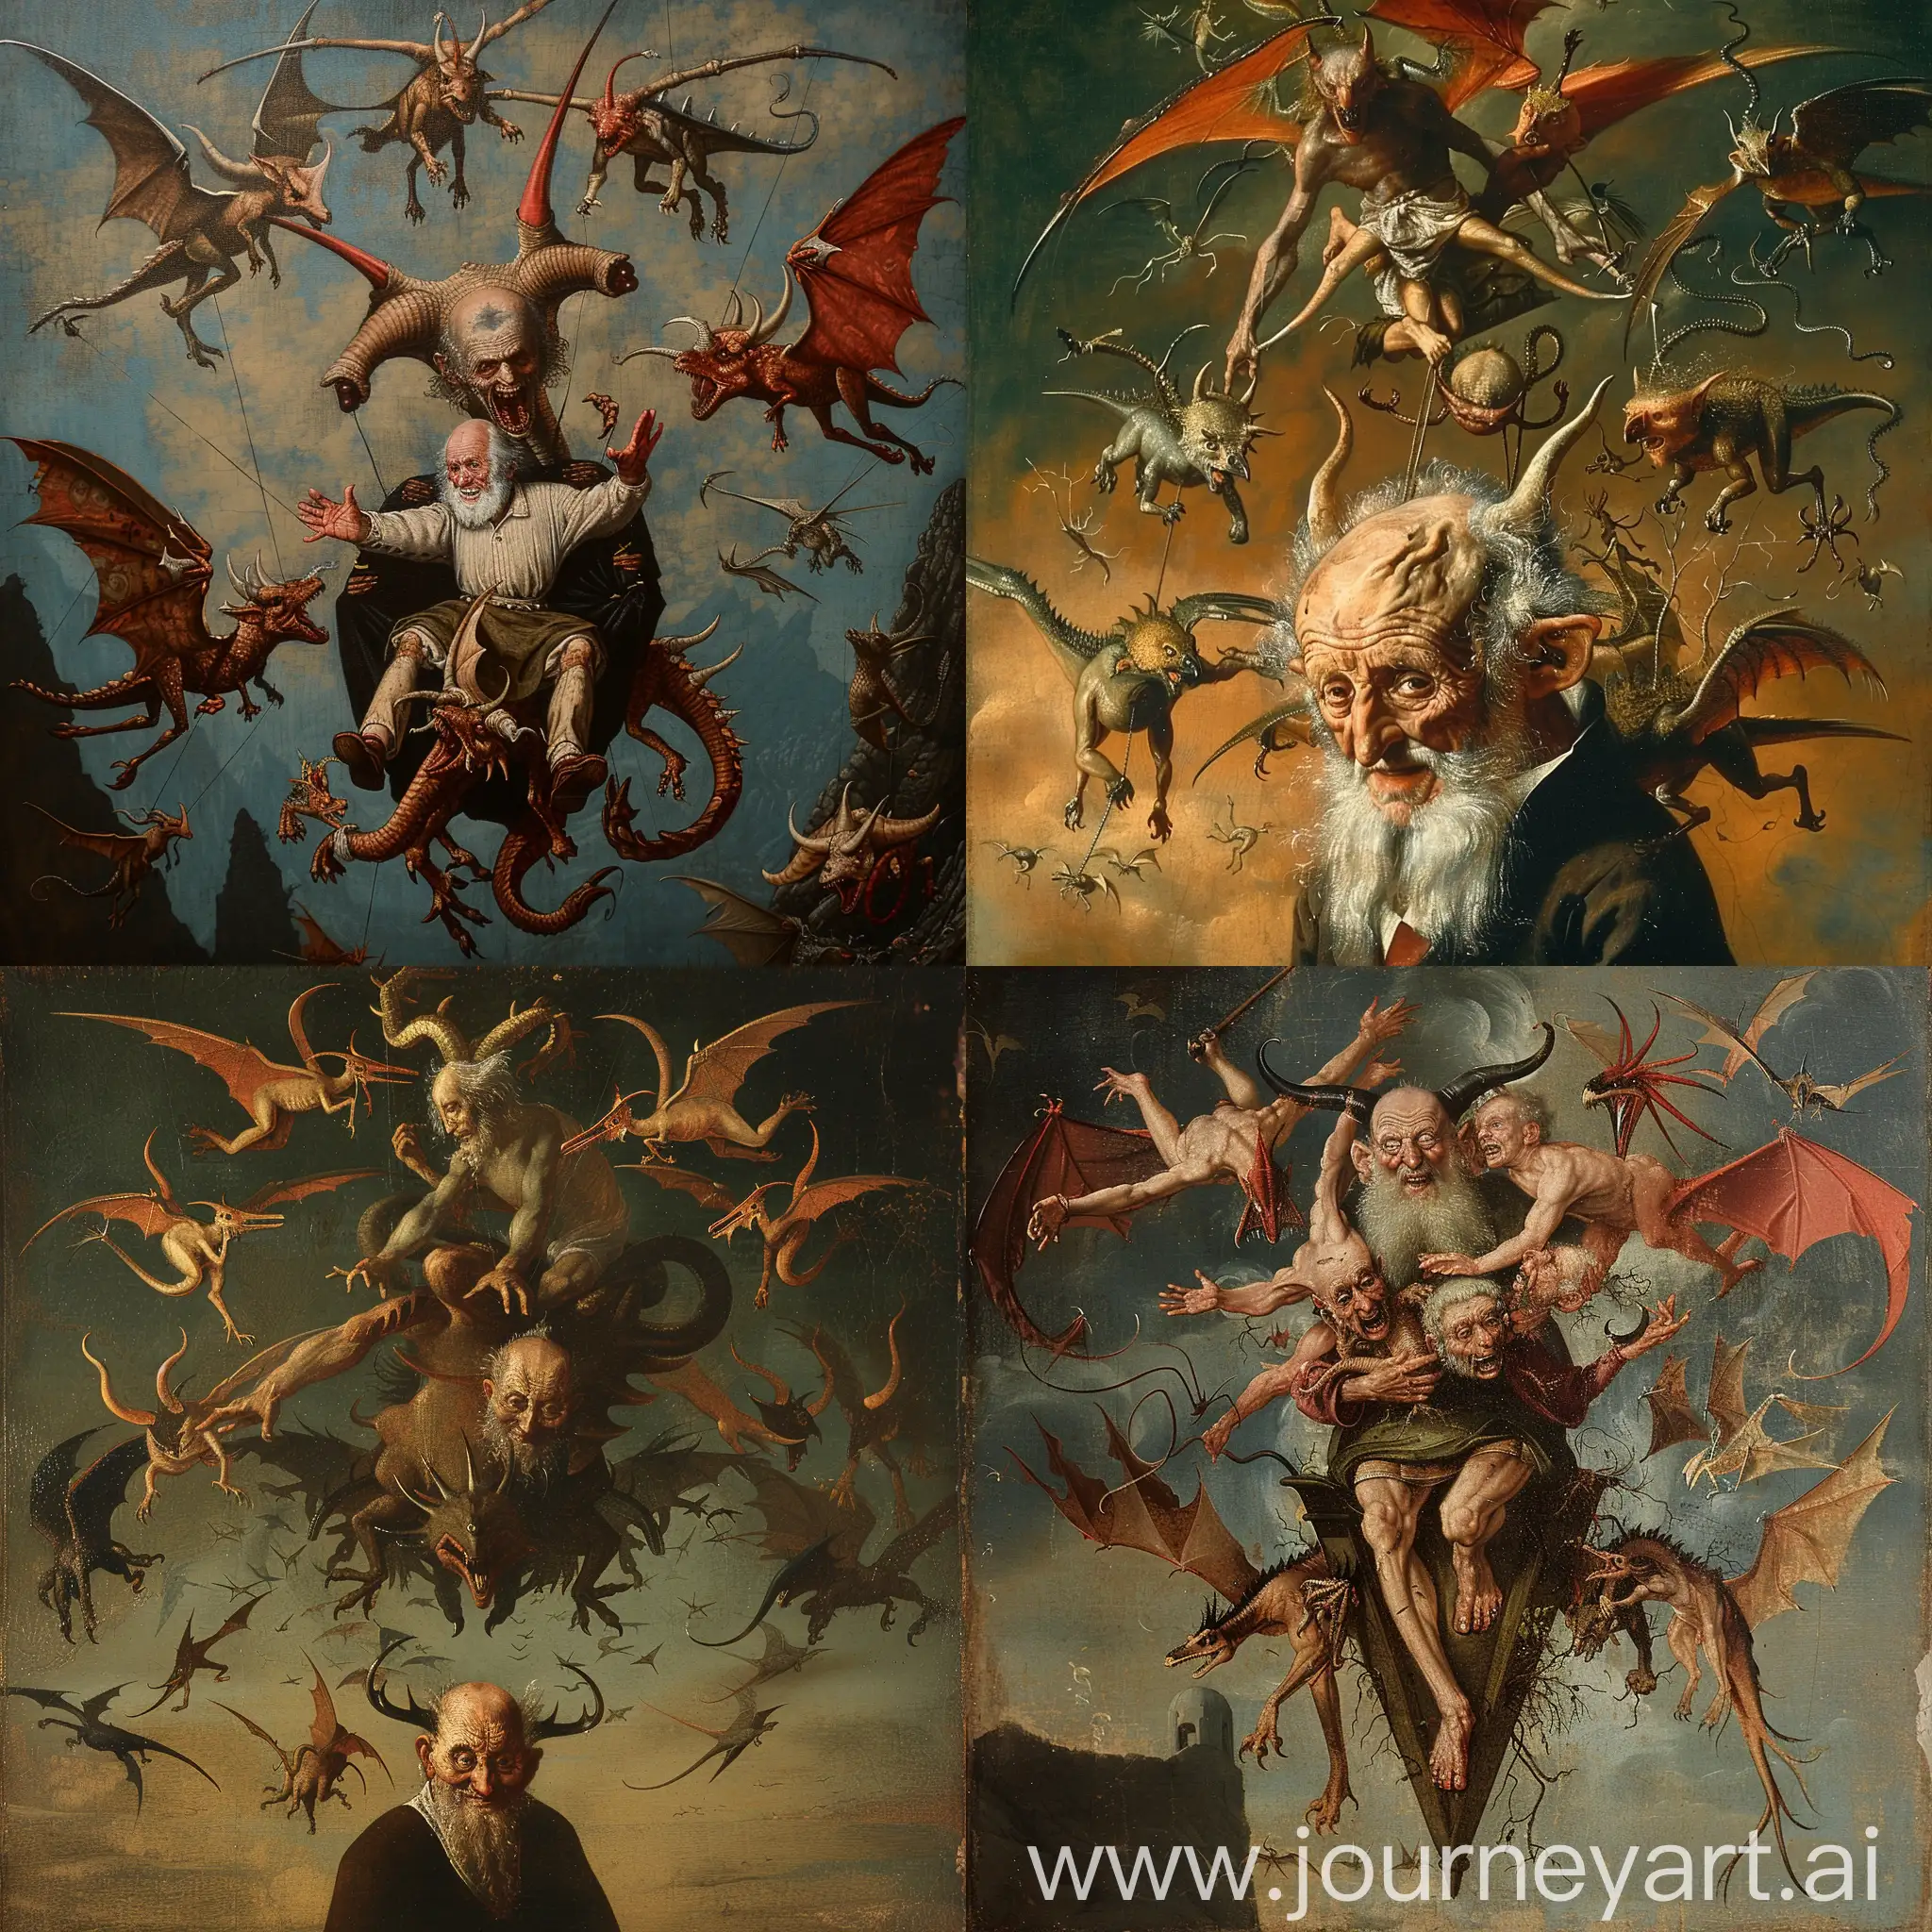 a painting of an old man carried in to the air by flying demons, a renaissance painting, inspired by Pisanello, devils horns, dark goddess with six arms, saint jerome as an hermit, with pterosaurs flying, epic portrait of menacing, in the center of the image, krampus, balanced masterpiece, michelangelo style, masterful, hydra with eight heads, breeding